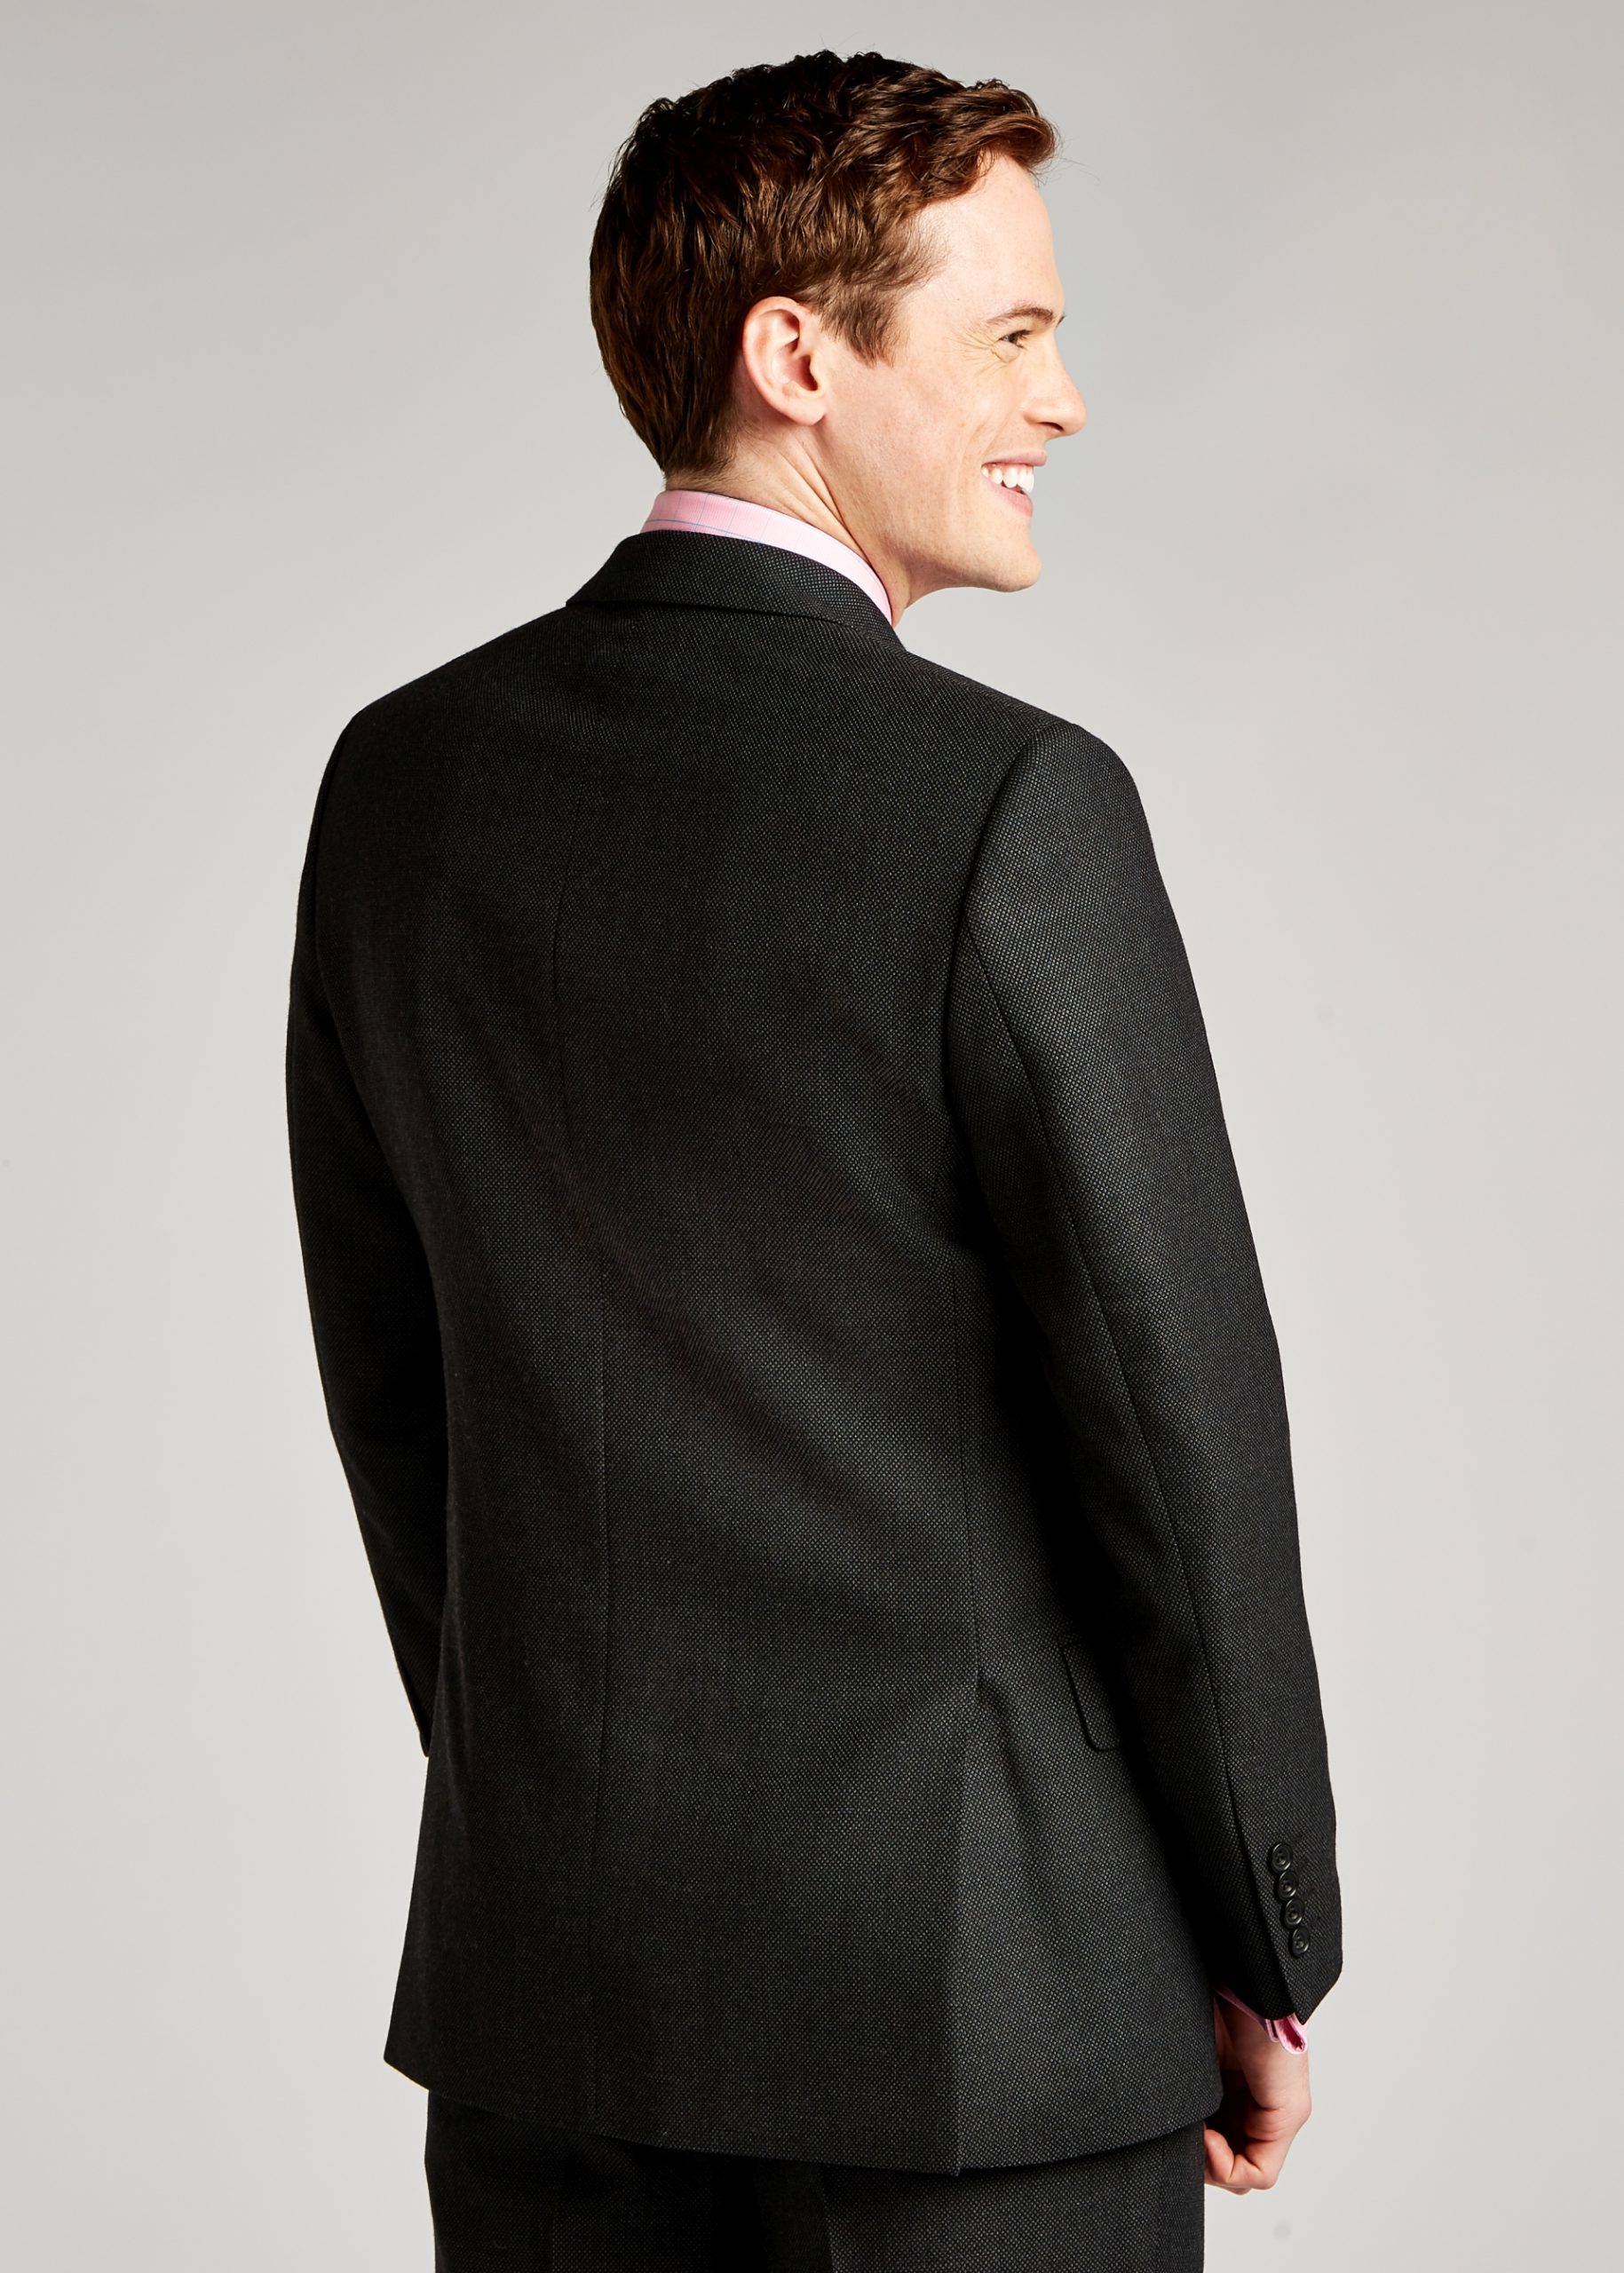 Back view of Roderick Charles tailored fit charcoal suit